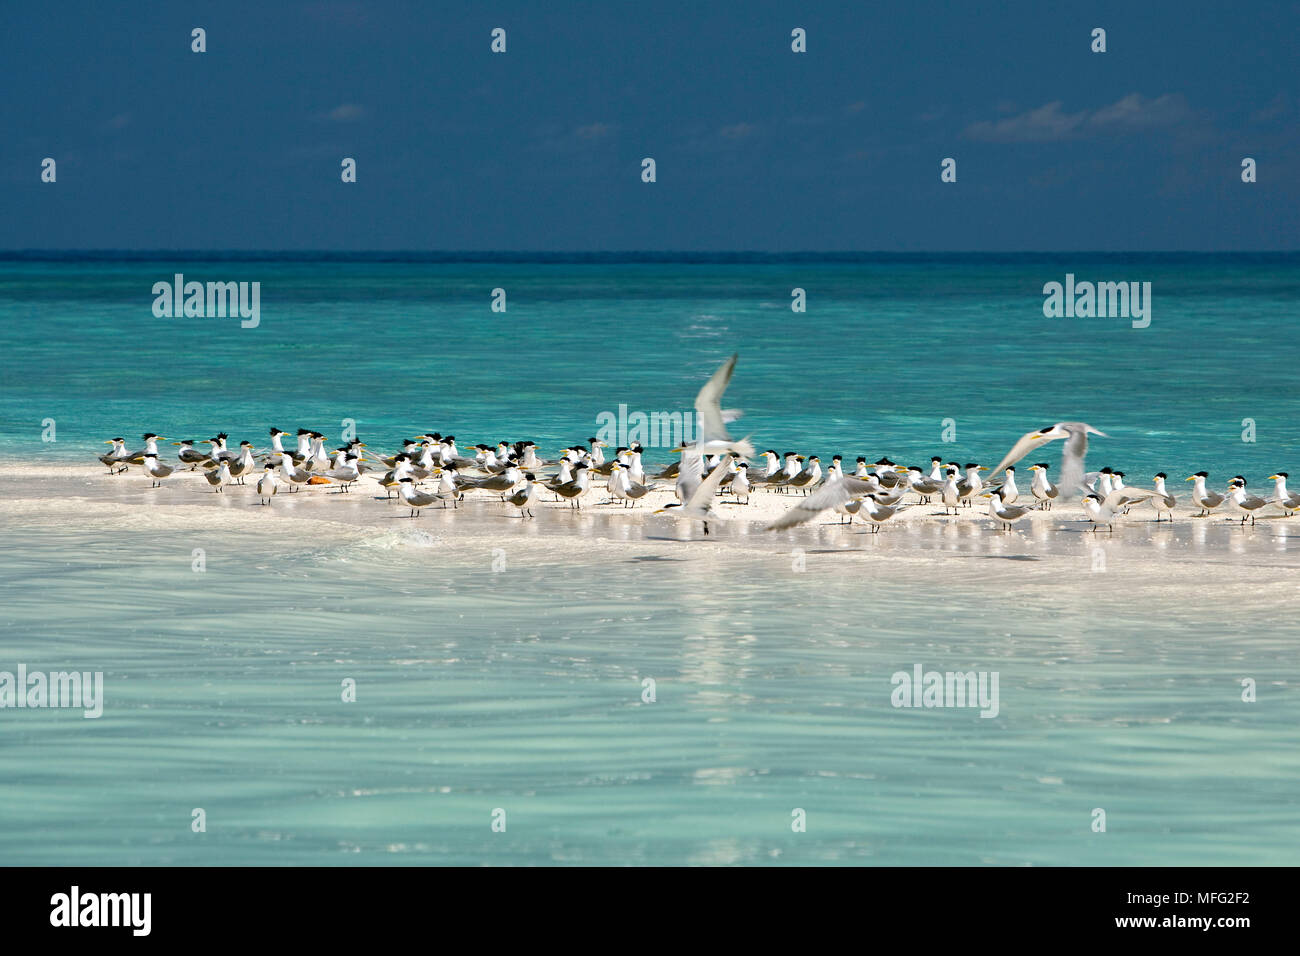 Greater Crested Tern, Crested Tern or Swift Tern, Thalasseus bergii on a strip of sand, Tubbataha Natural Park, Natural World Heritage Site,  Sulu Sea Stock Photo